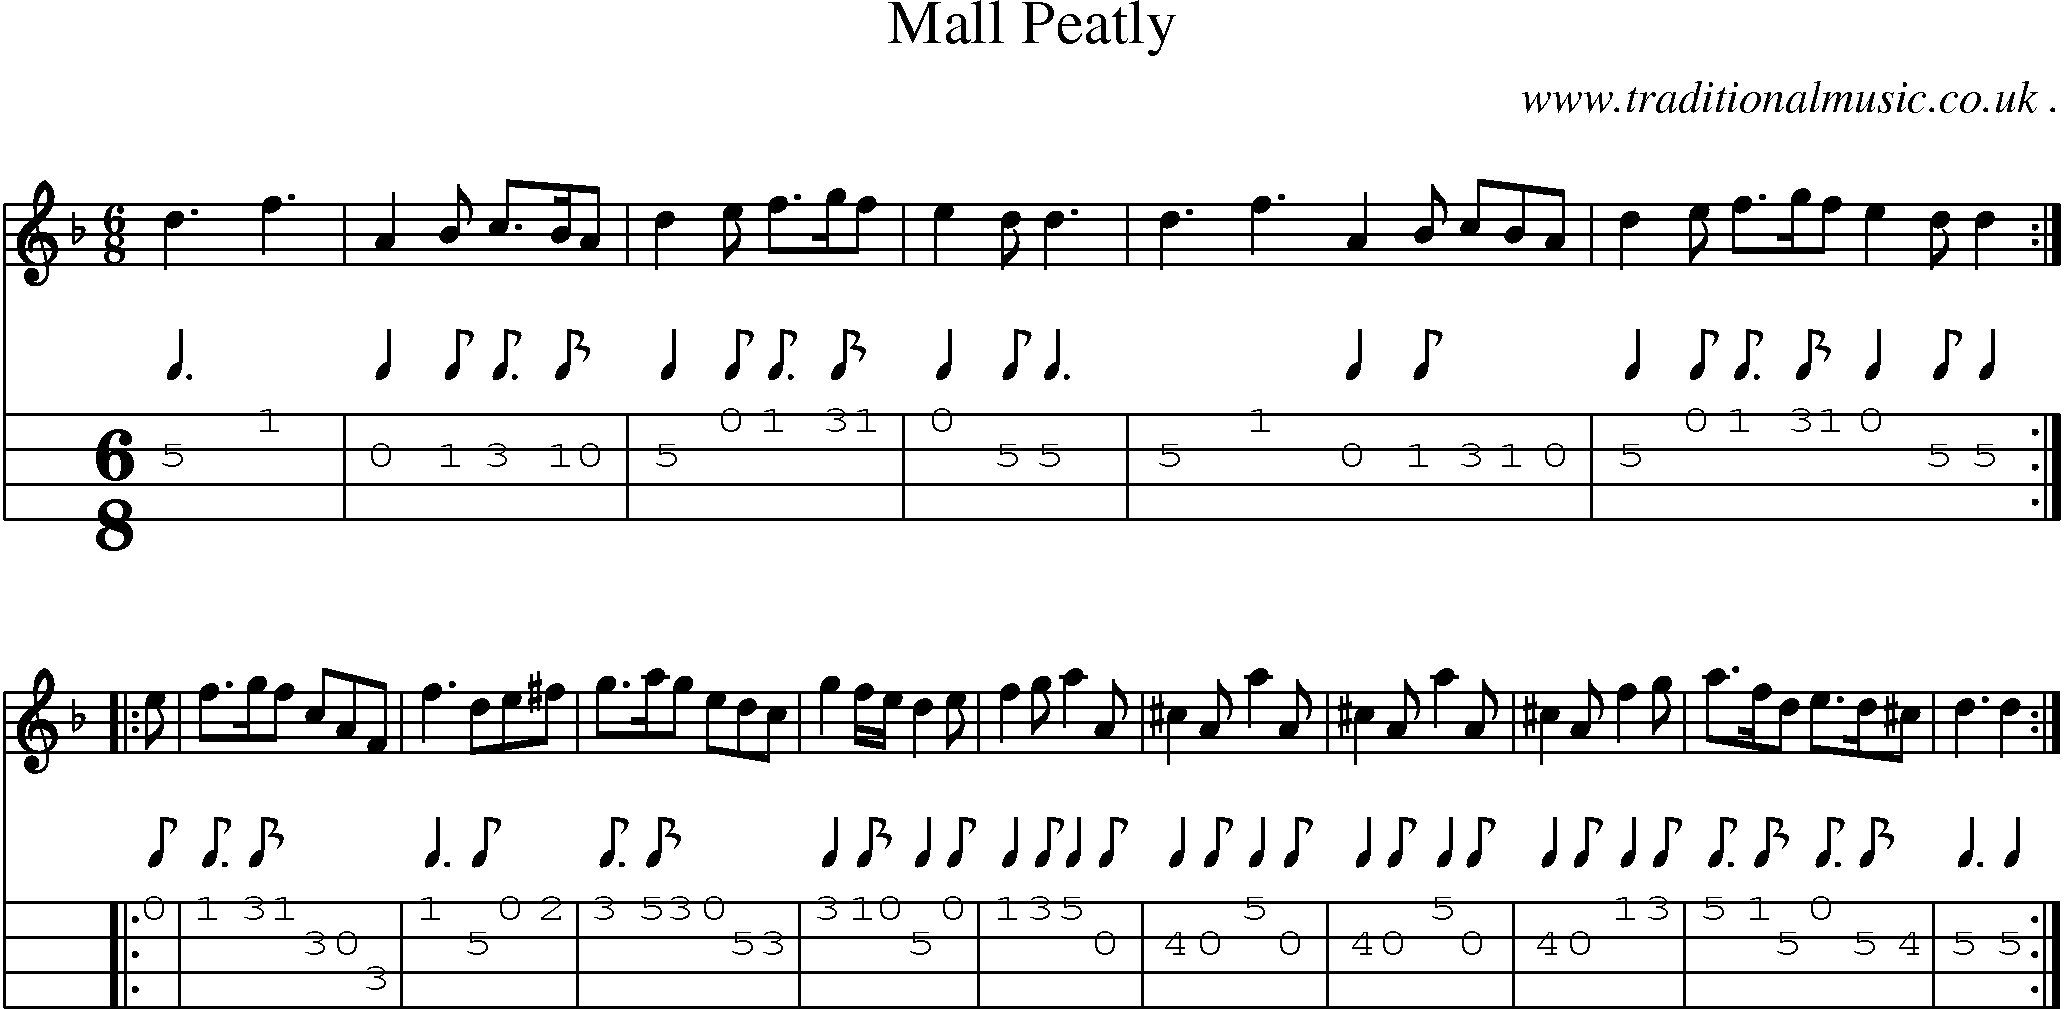 Sheet-Music and Mandolin Tabs for Mall Peatly